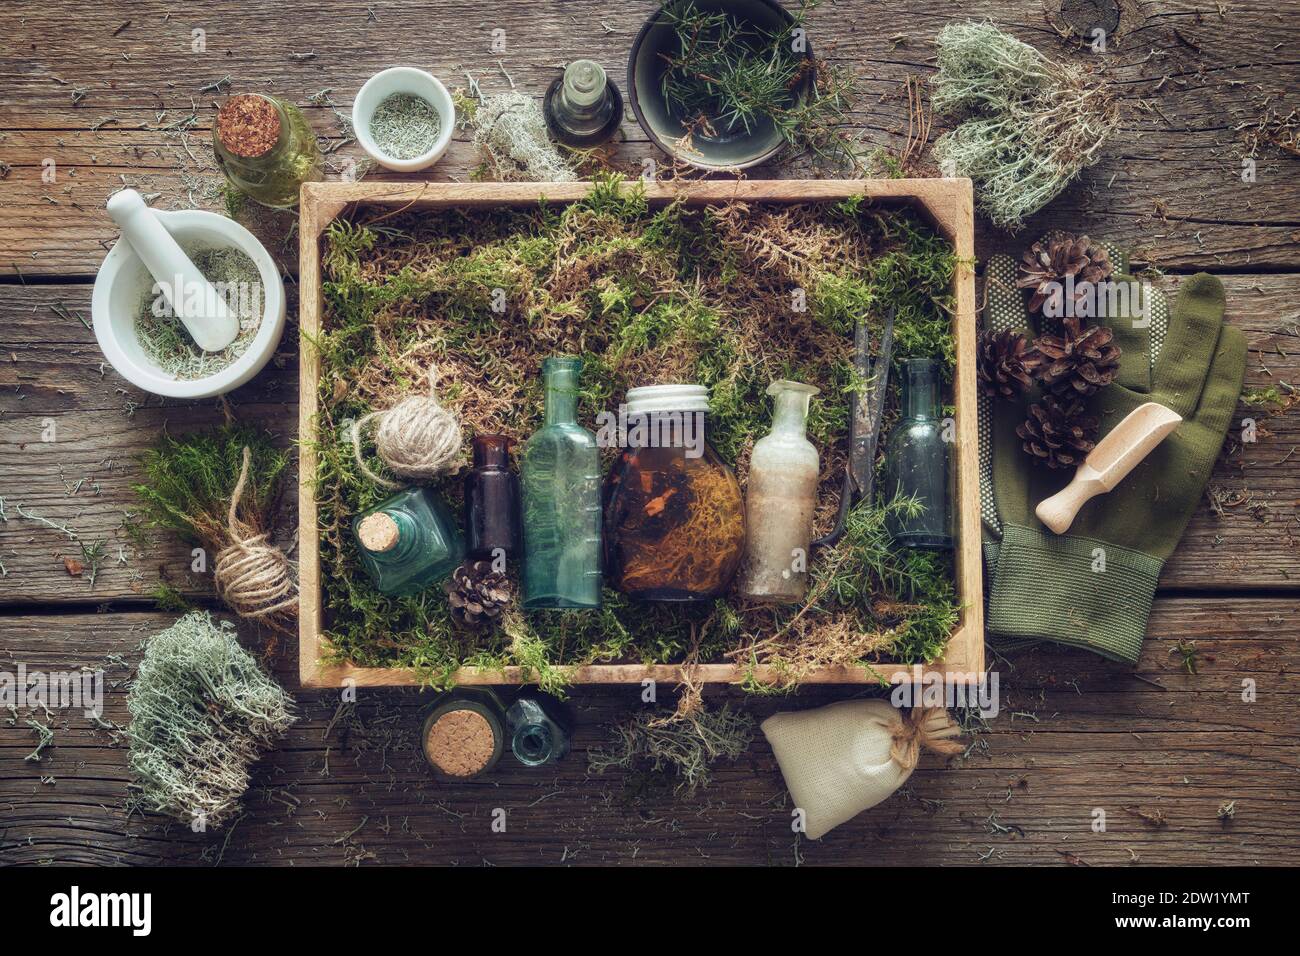 Healthy infusion and oil bottles, wooden box of healthy moss, lichen, moss, juniper, pine cones on wooden table. Alternative medicine. Stock Photo